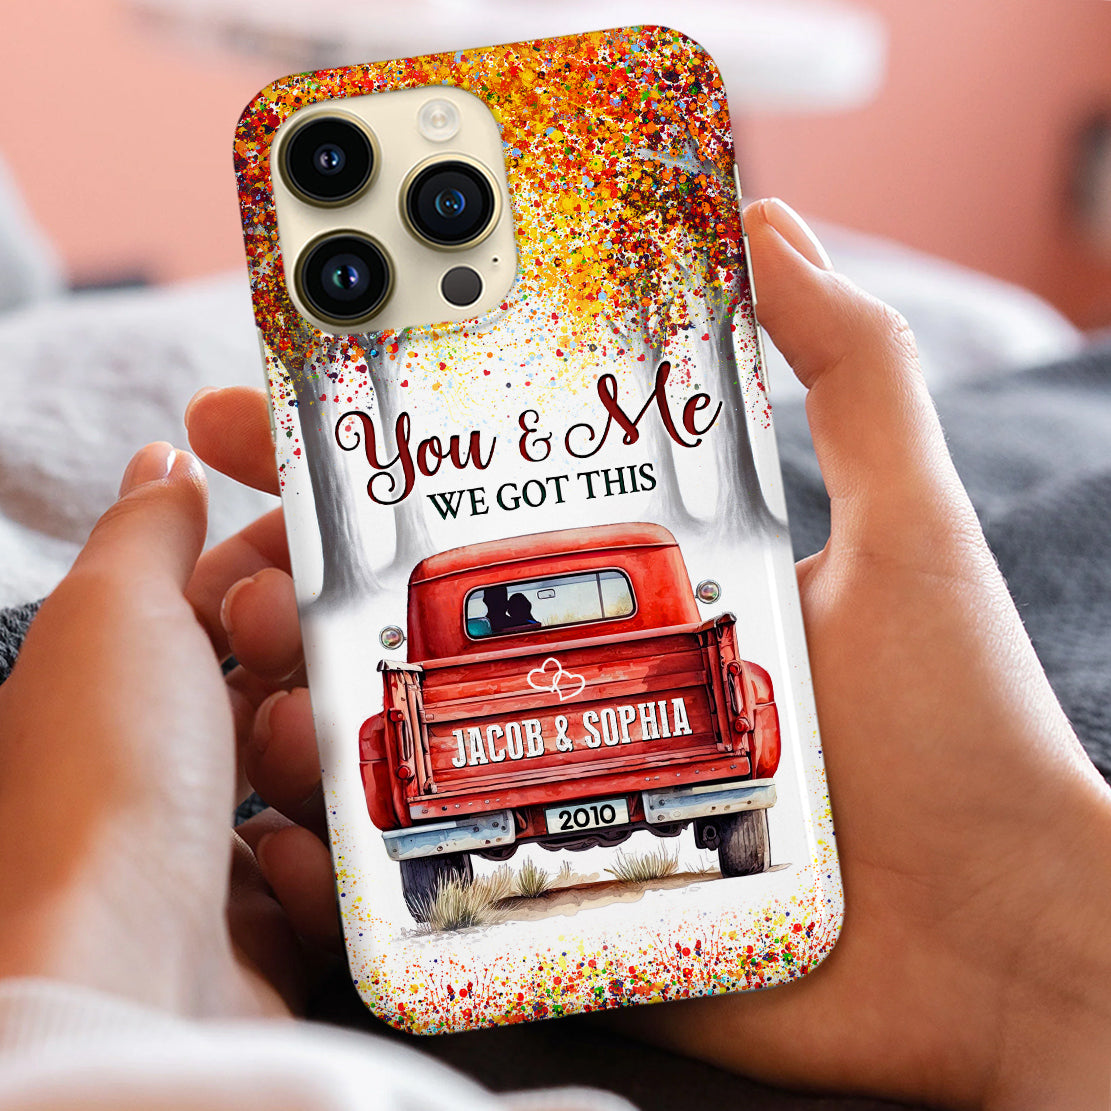 You & Me We Got This Red Truck Personalized Silicone Phone Case Gift For Couples VTX15DEC23CT2